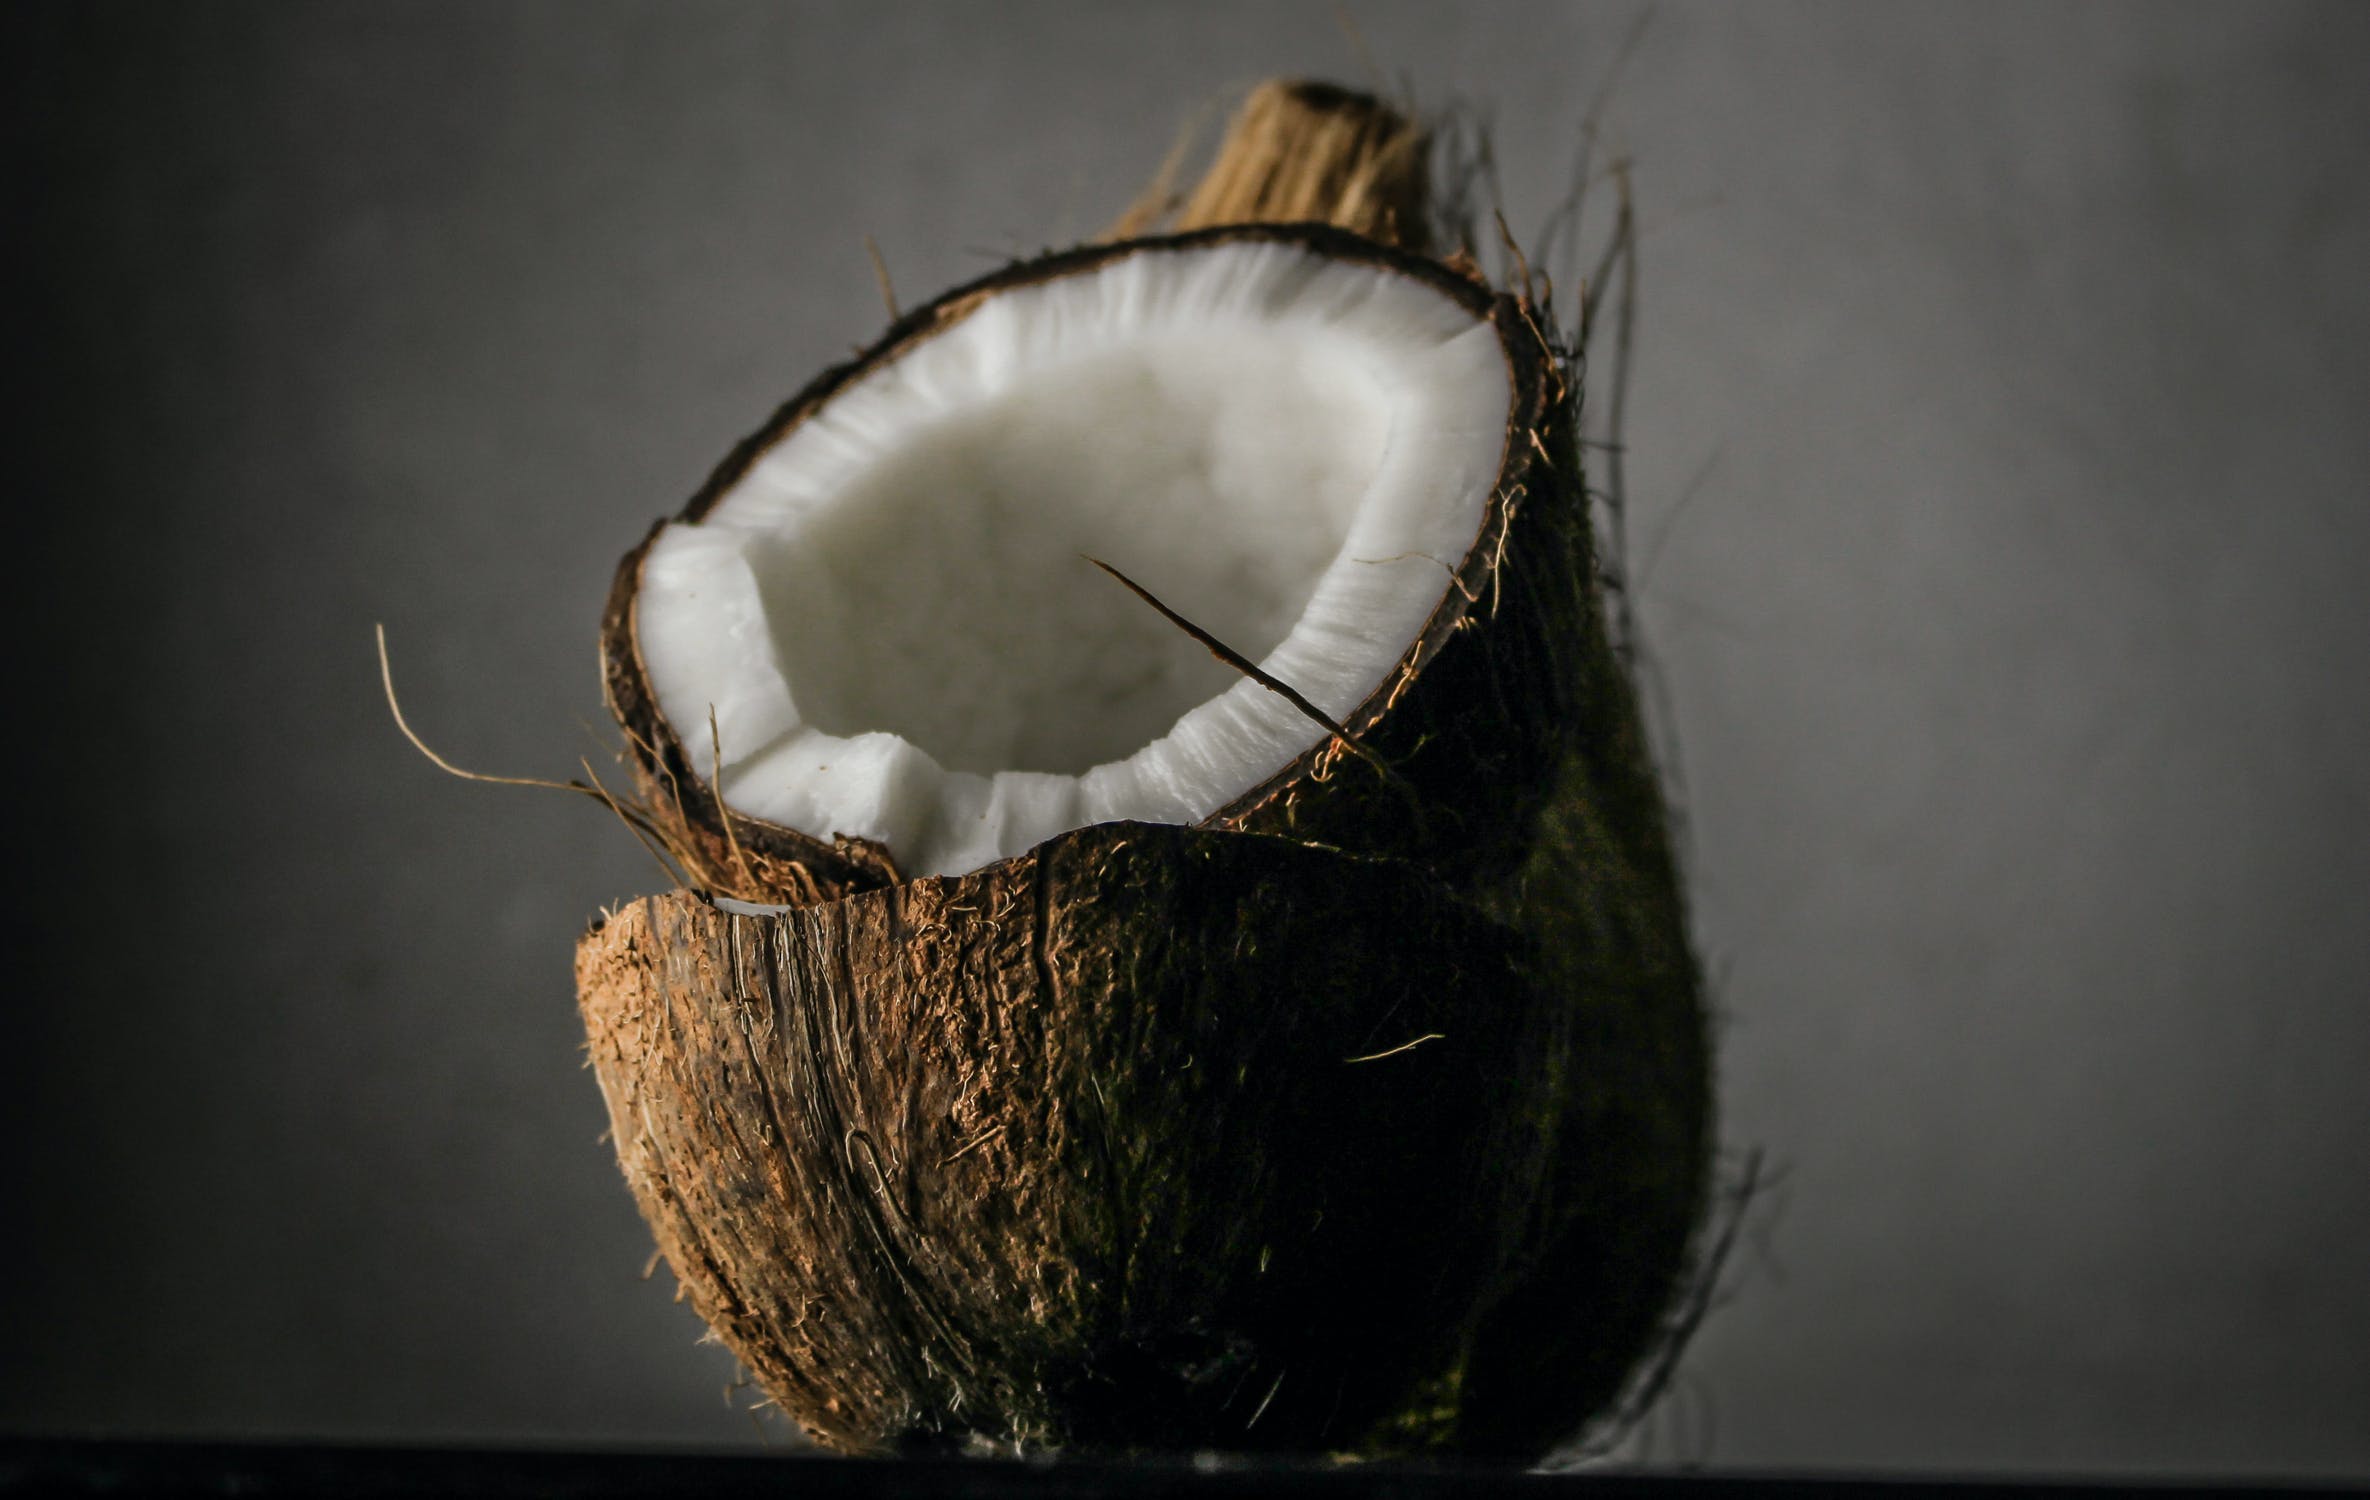 coconut oil for yeast infection